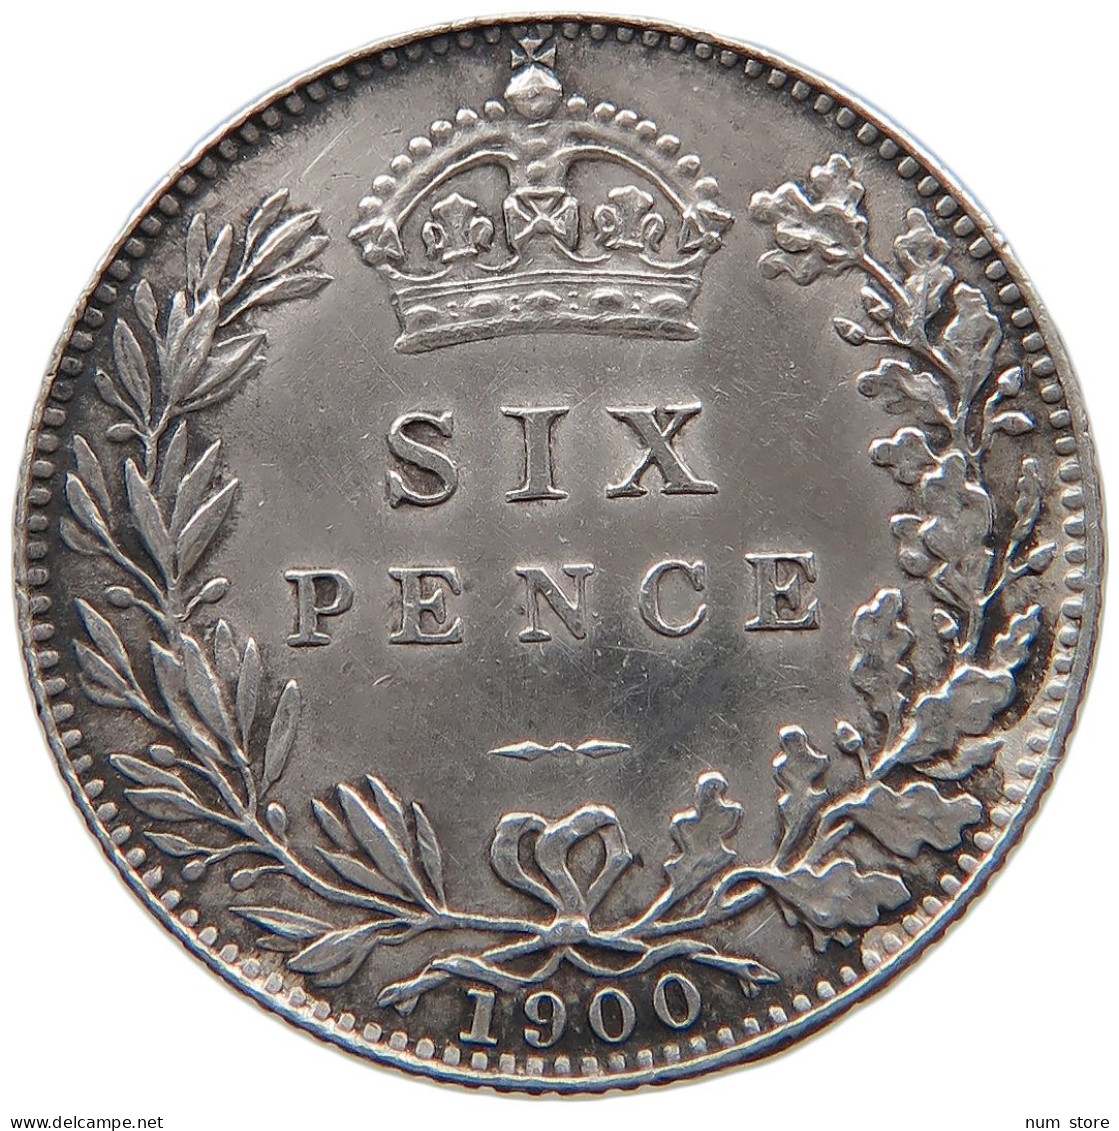 GREAT BRITAIN SIXPENCE 1900 Victoria 1837-1901 #t143 0491 - H. 6 Pence